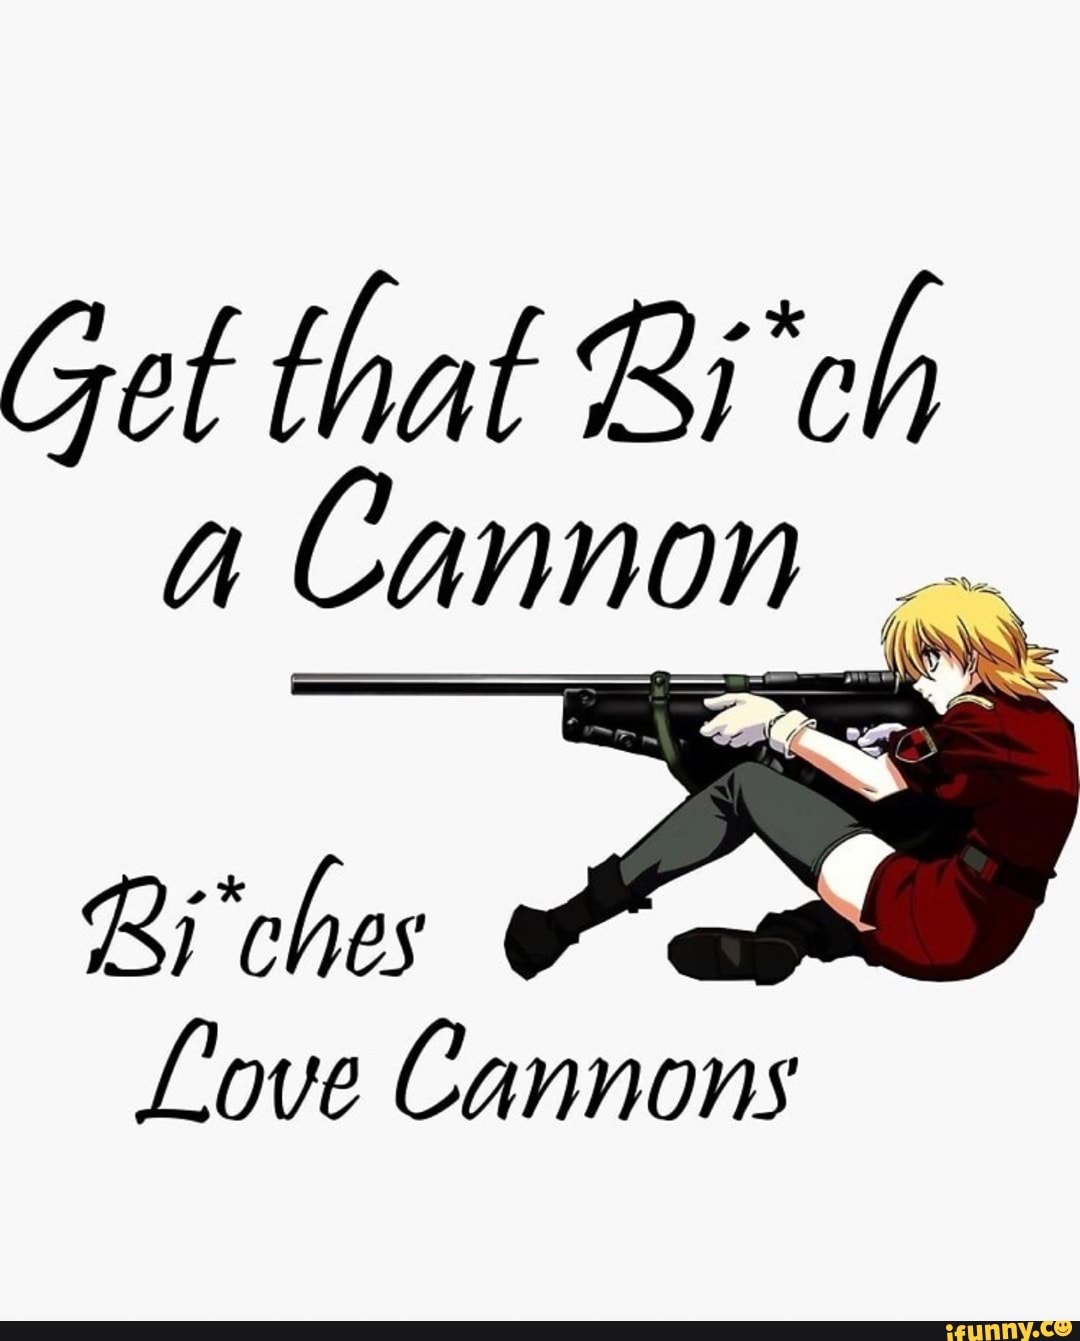 bitches love cannons shirt